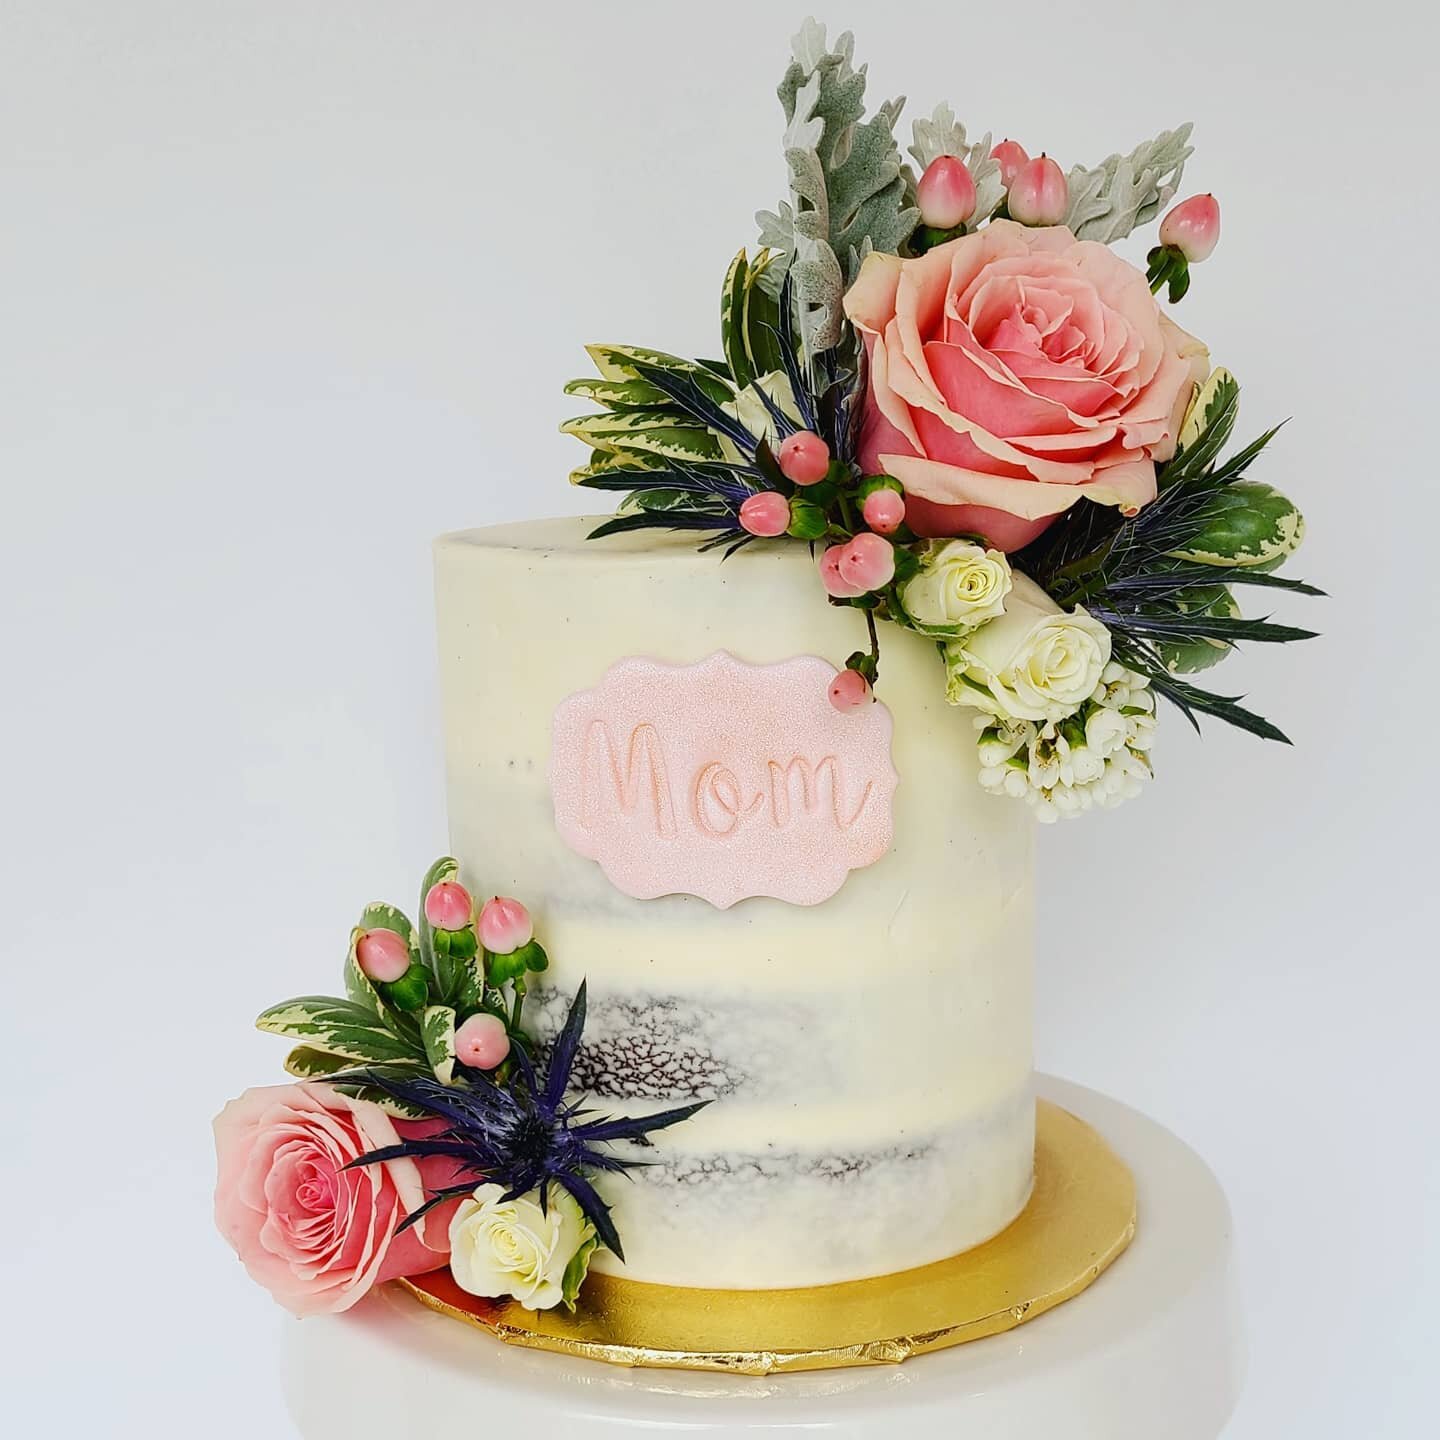 Happy mother's day!!!🌷🌷🌷
Gorgeous florals from @bloomsinhand 
Lettering from @customcuttersandembossers 
#mothersday #mothersdaycake #mothersdayflowers #mom #mompreneur #momlife #cakelove #cakestyling #nakedcake #floralcake #thistle #nj #nyc #njca